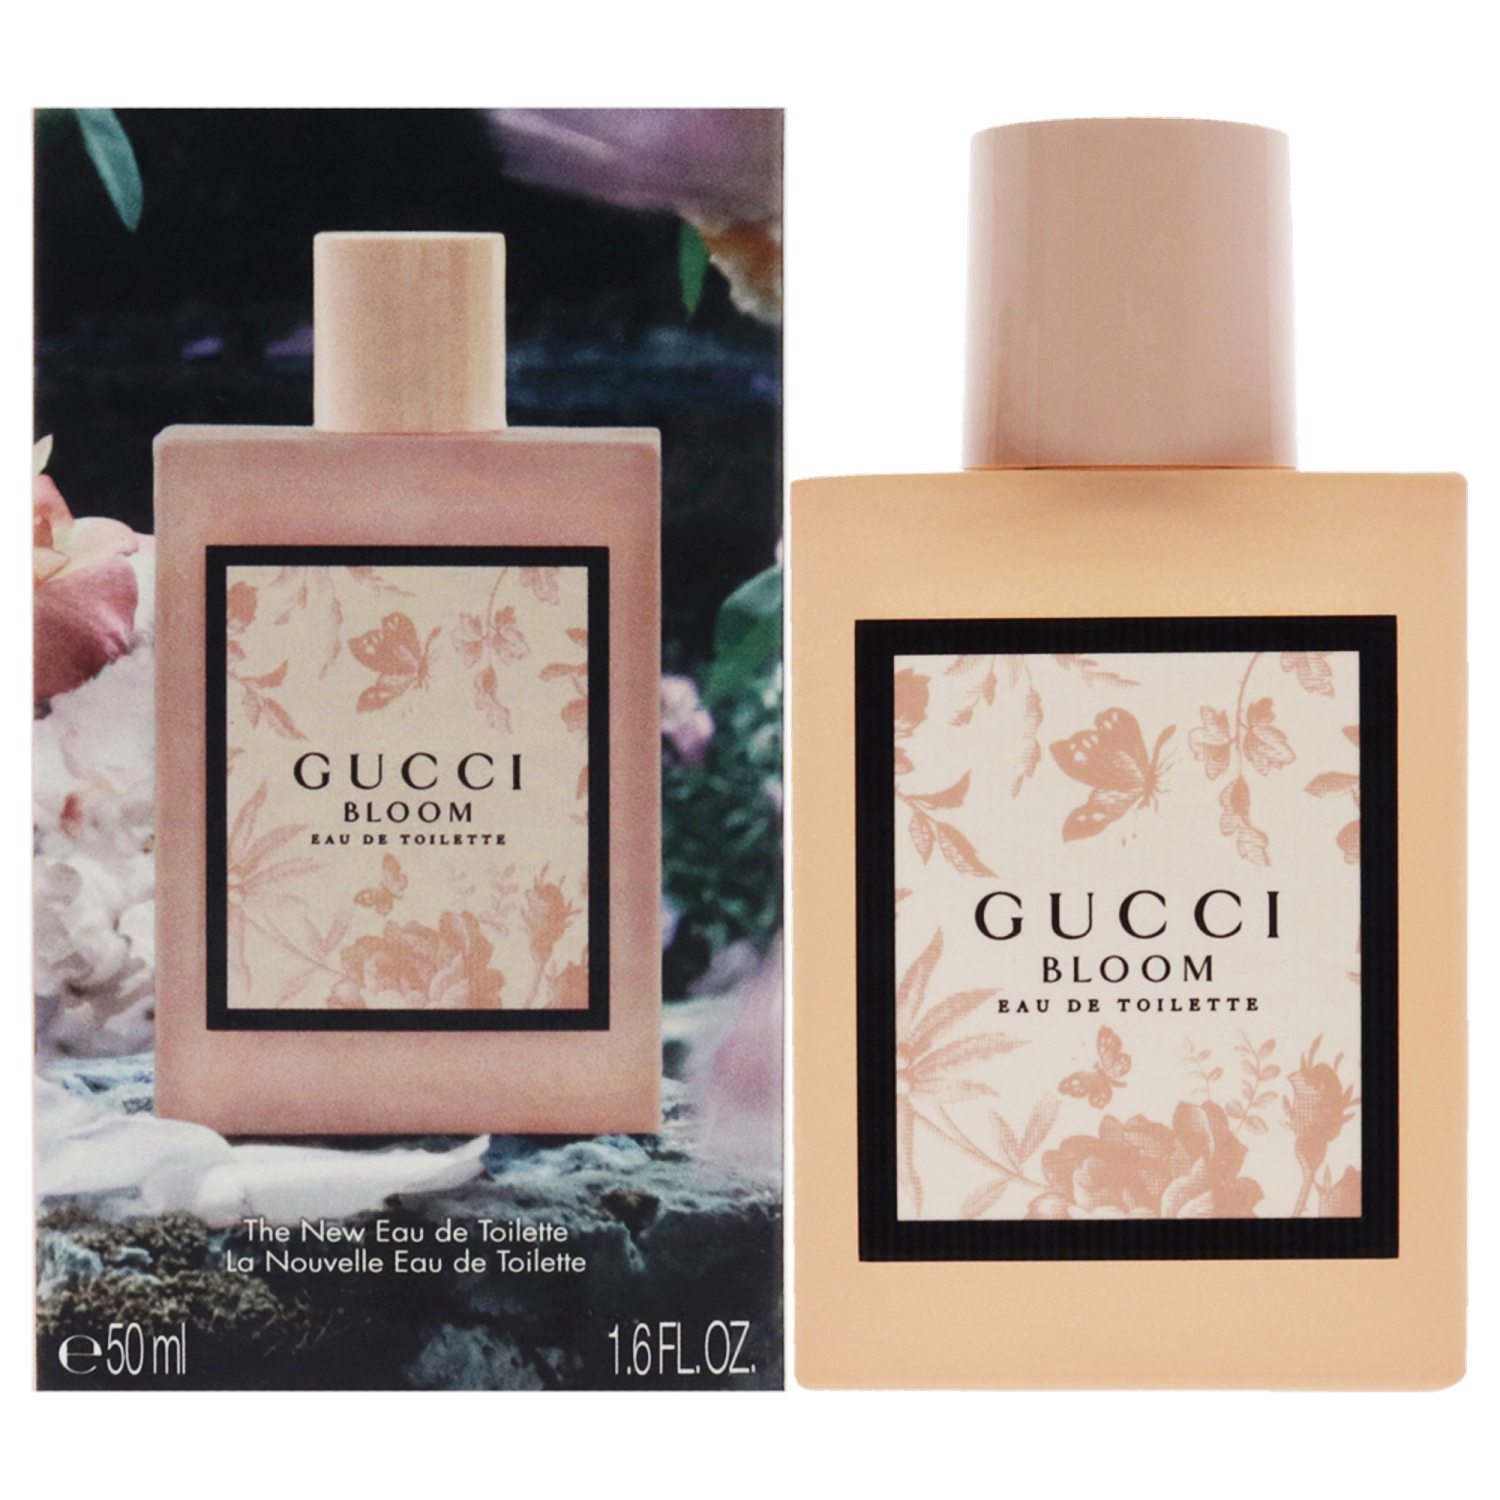 Gucci Bloom by Gucci for Women - 1.6 oz EDT Spray